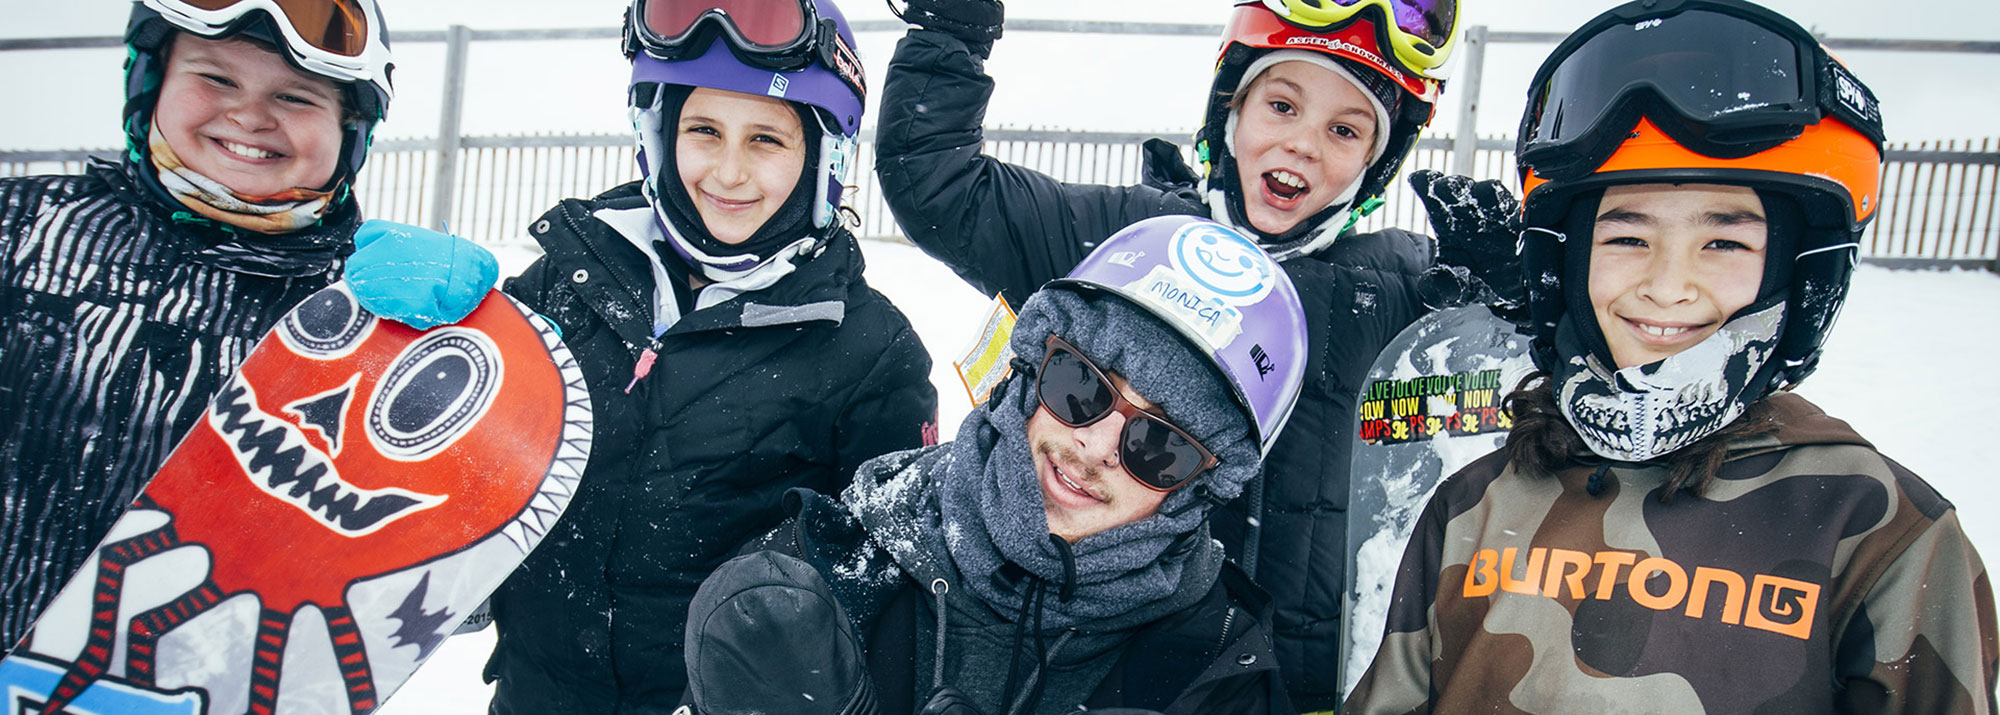 The Fun of Skiing and Snowboarding for Kids